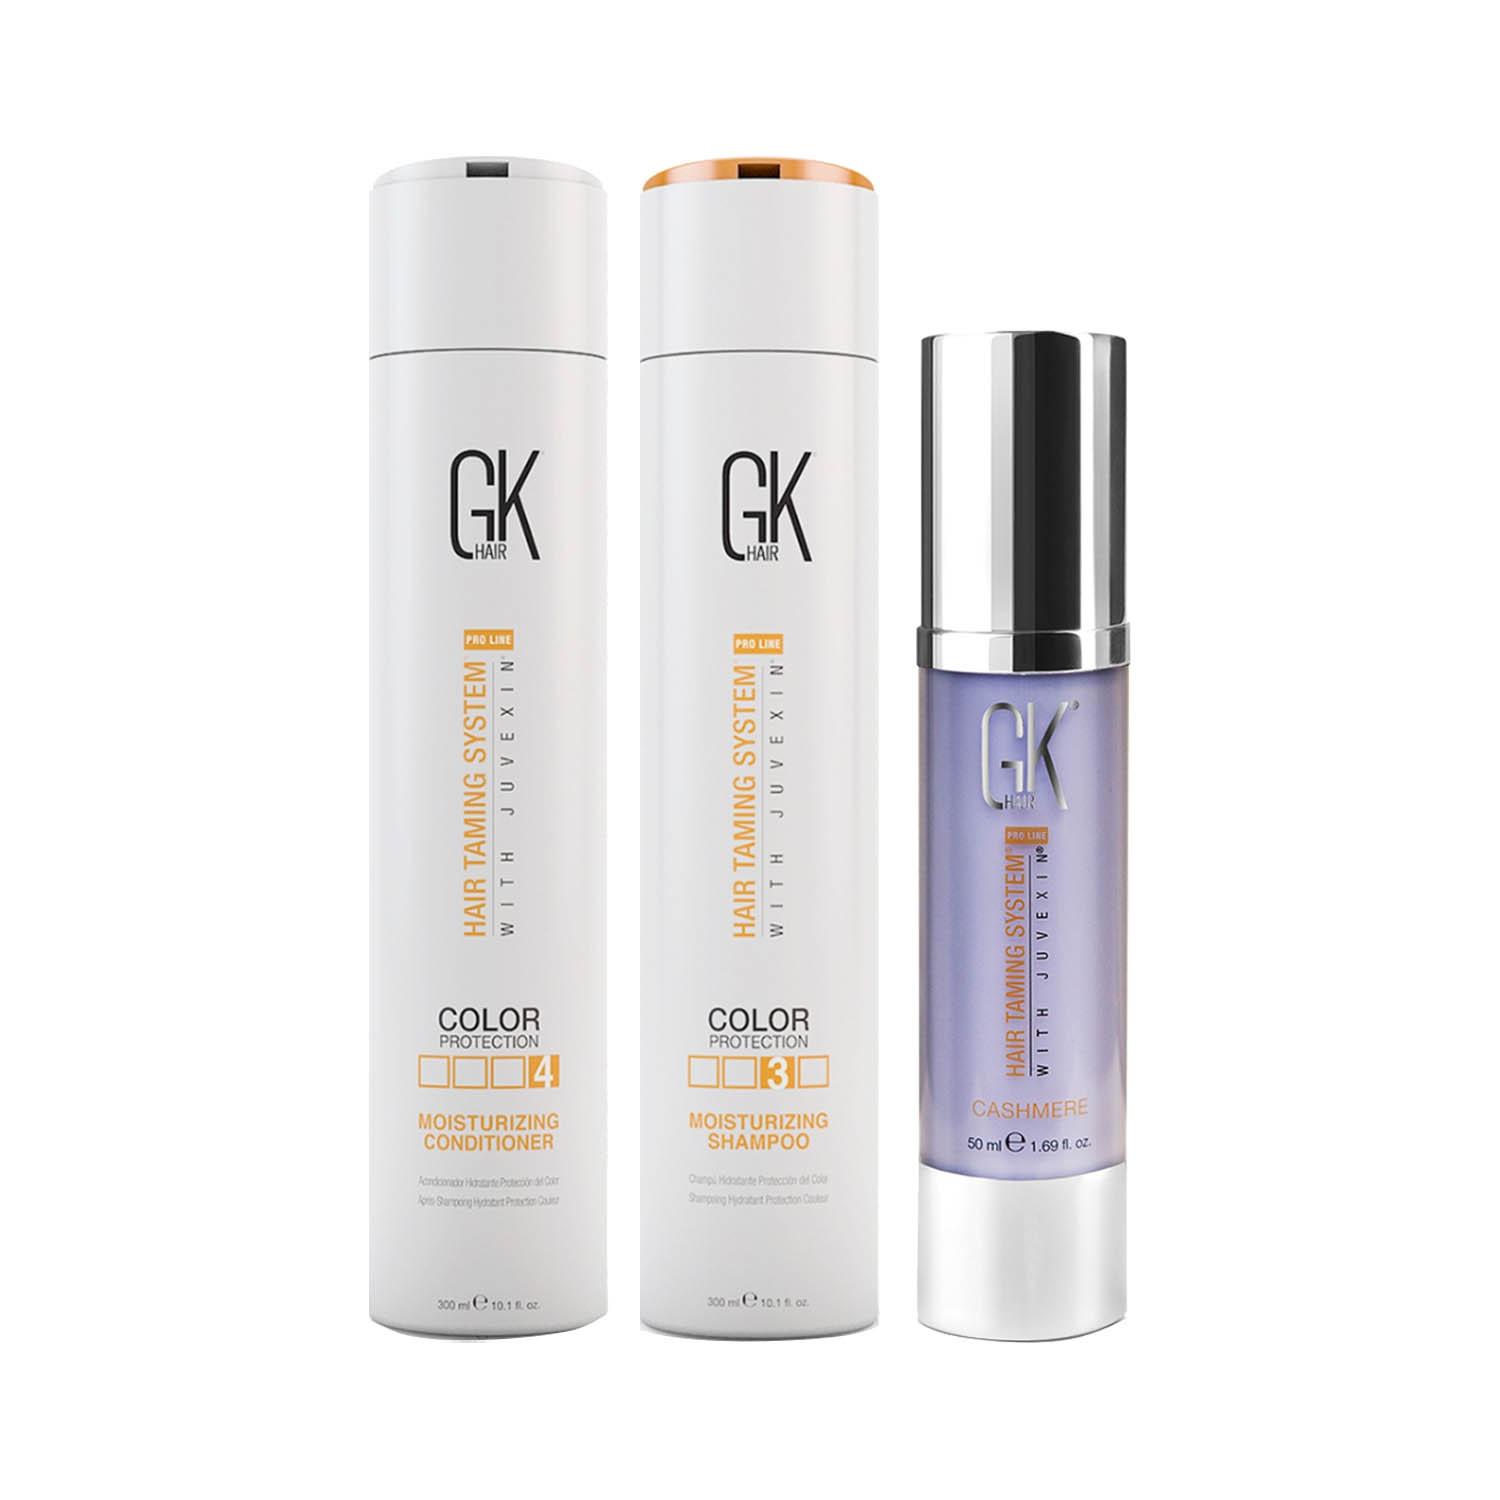 GK Hair Moisturizing Shampoo and Conditioner 300ml with Cashmere 50ml